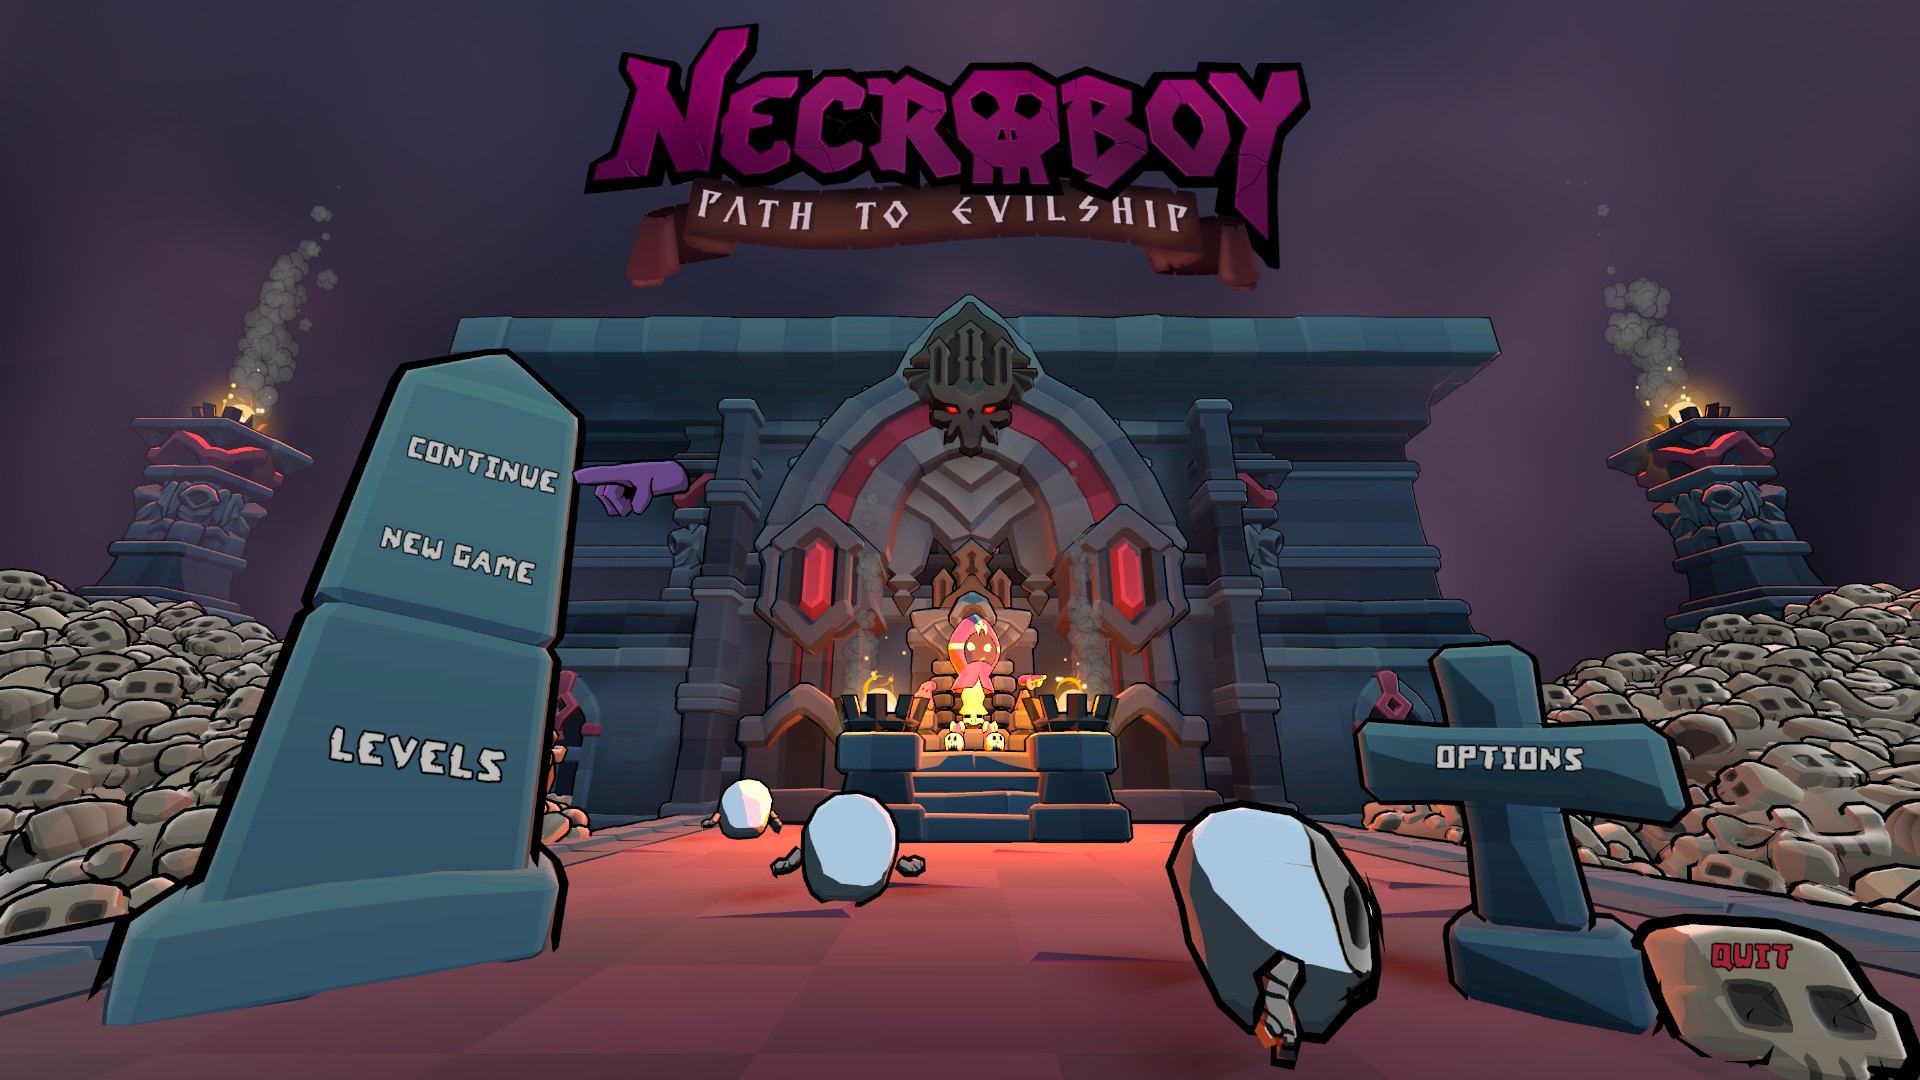 the opening menu screen, shows the game name Necroboy: Path to evilship at the top, with continue game, new game, levels and options as well as an option to quit.